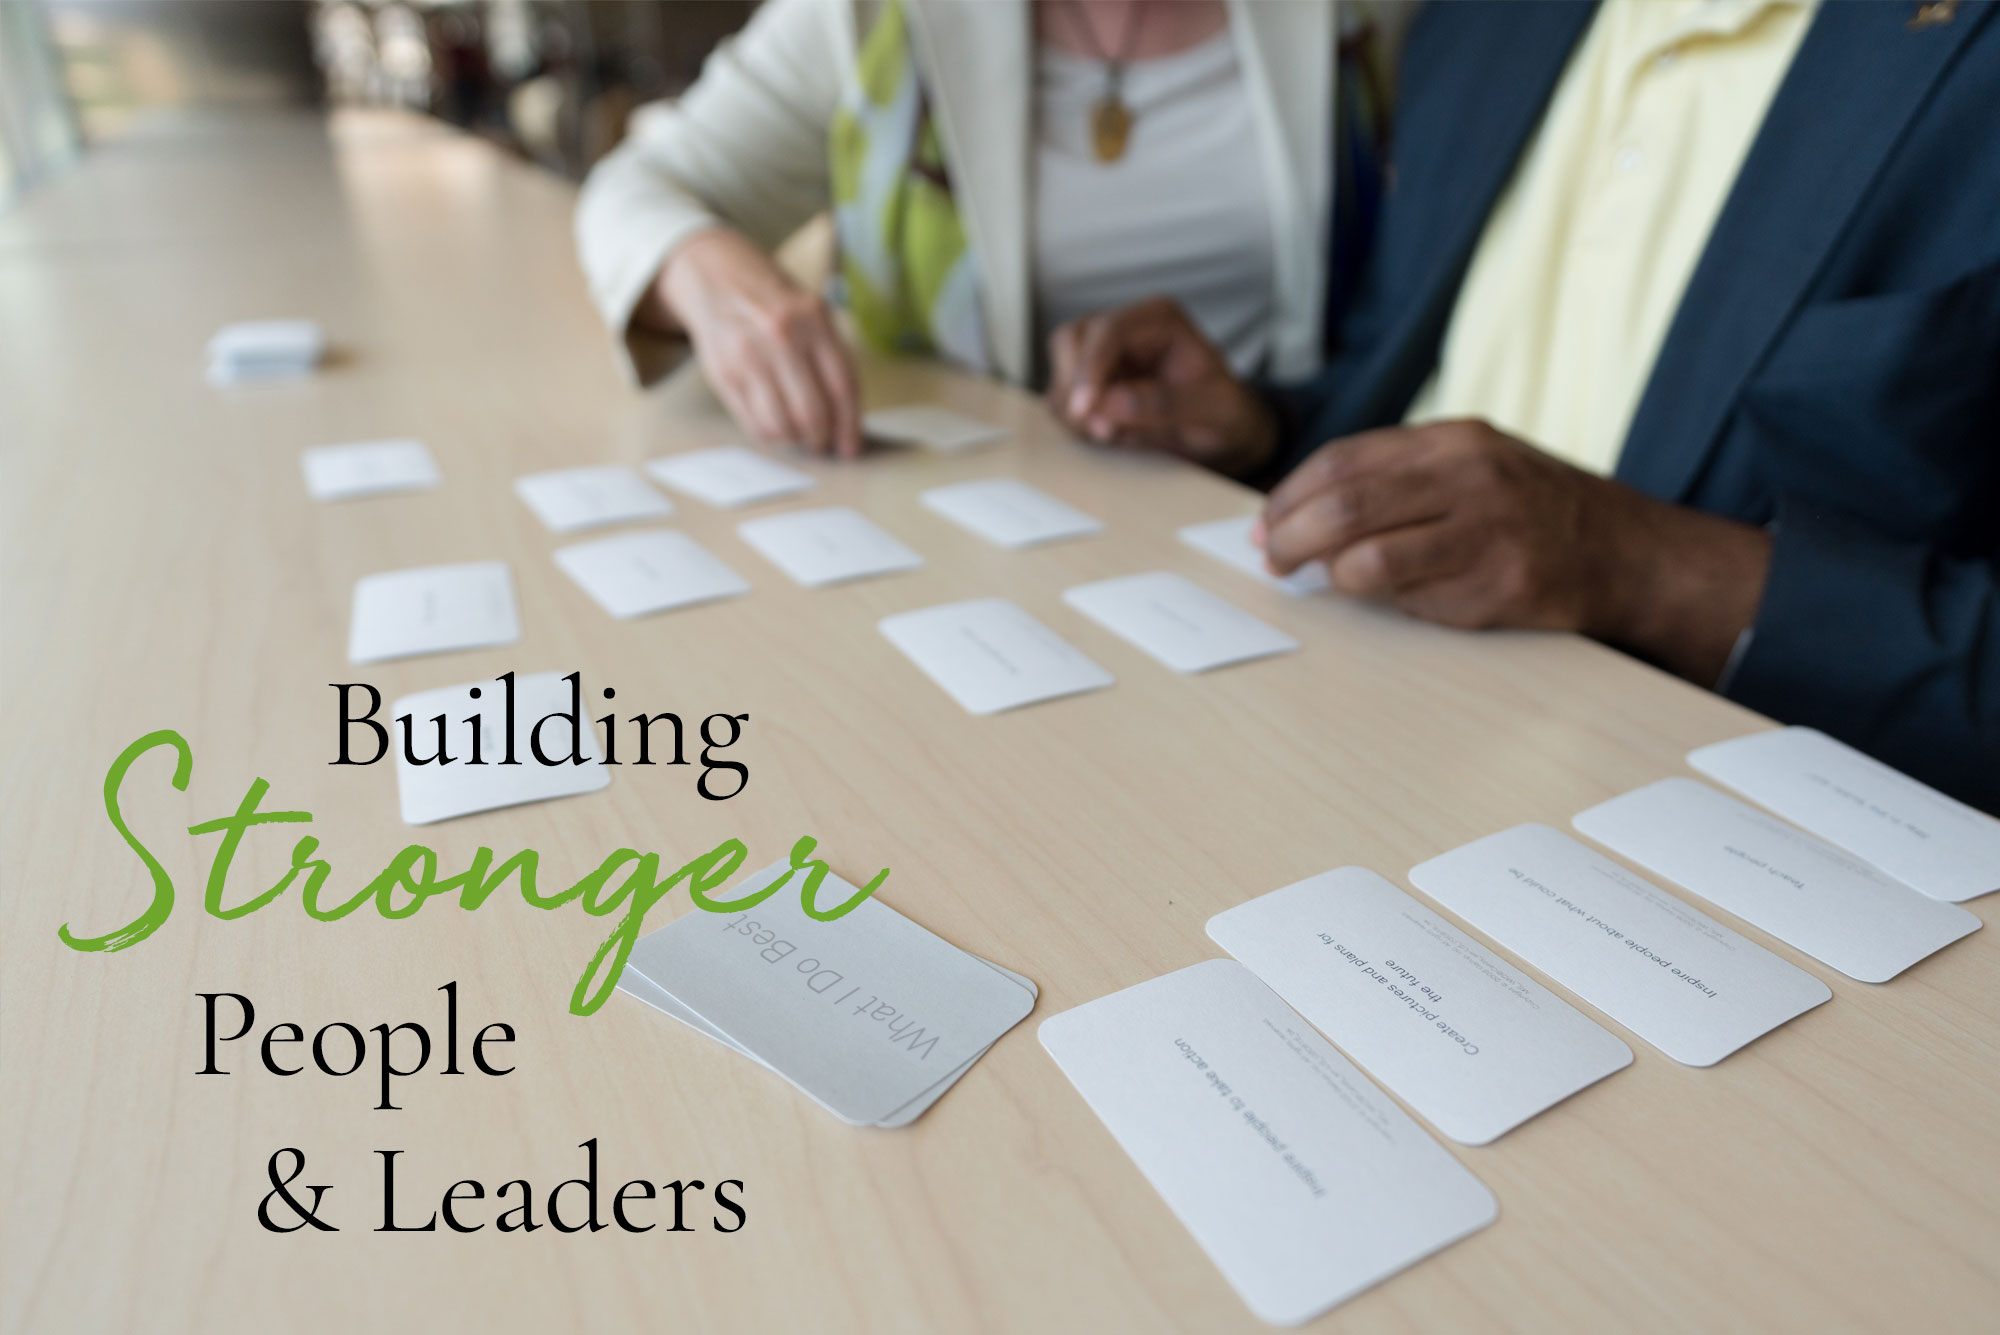 building-stronger-people-organizations-3